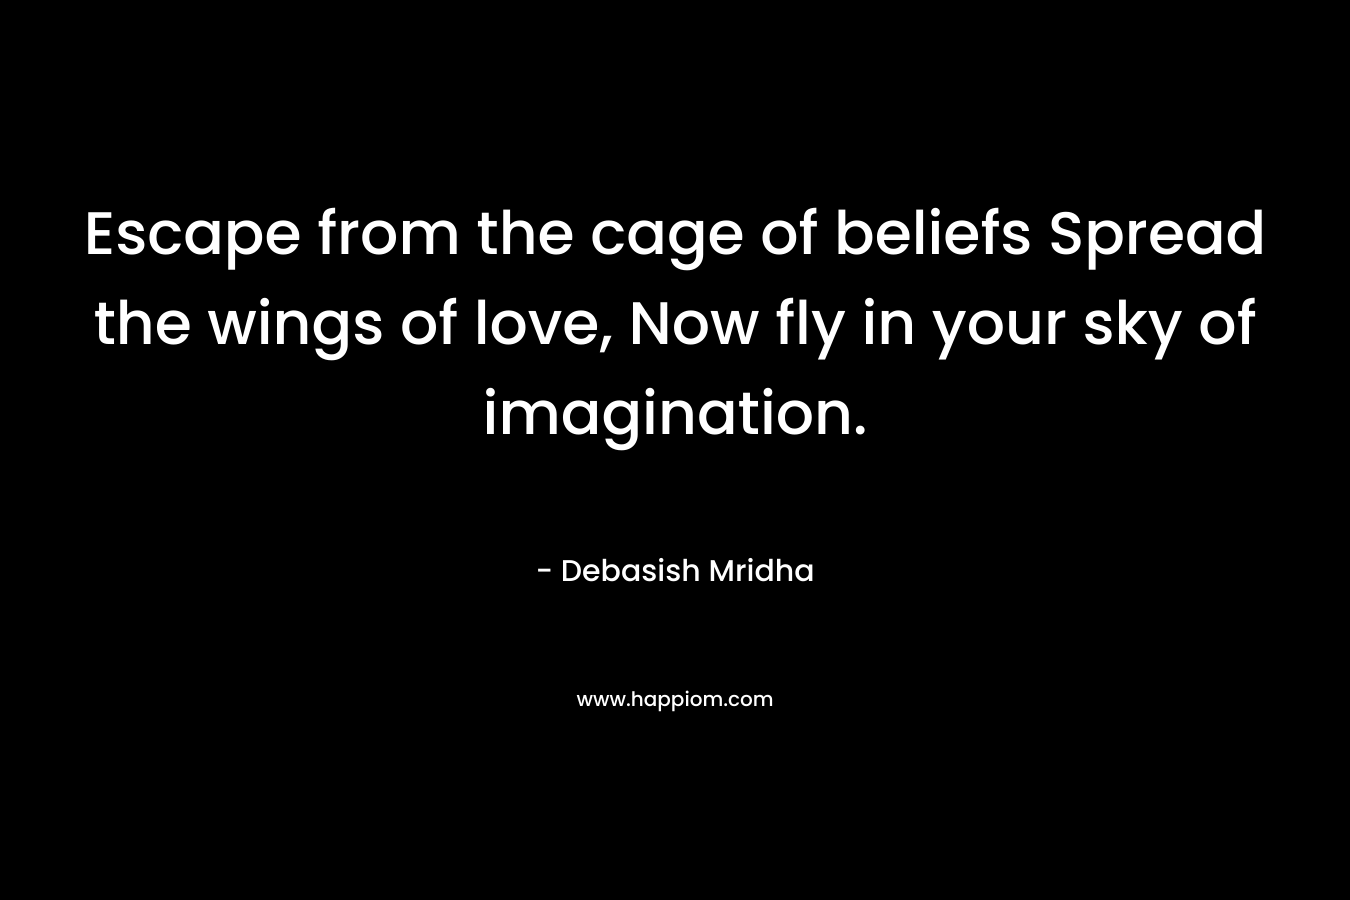 Escape from the cage of beliefs Spread the wings of love, Now fly in your sky of imagination.